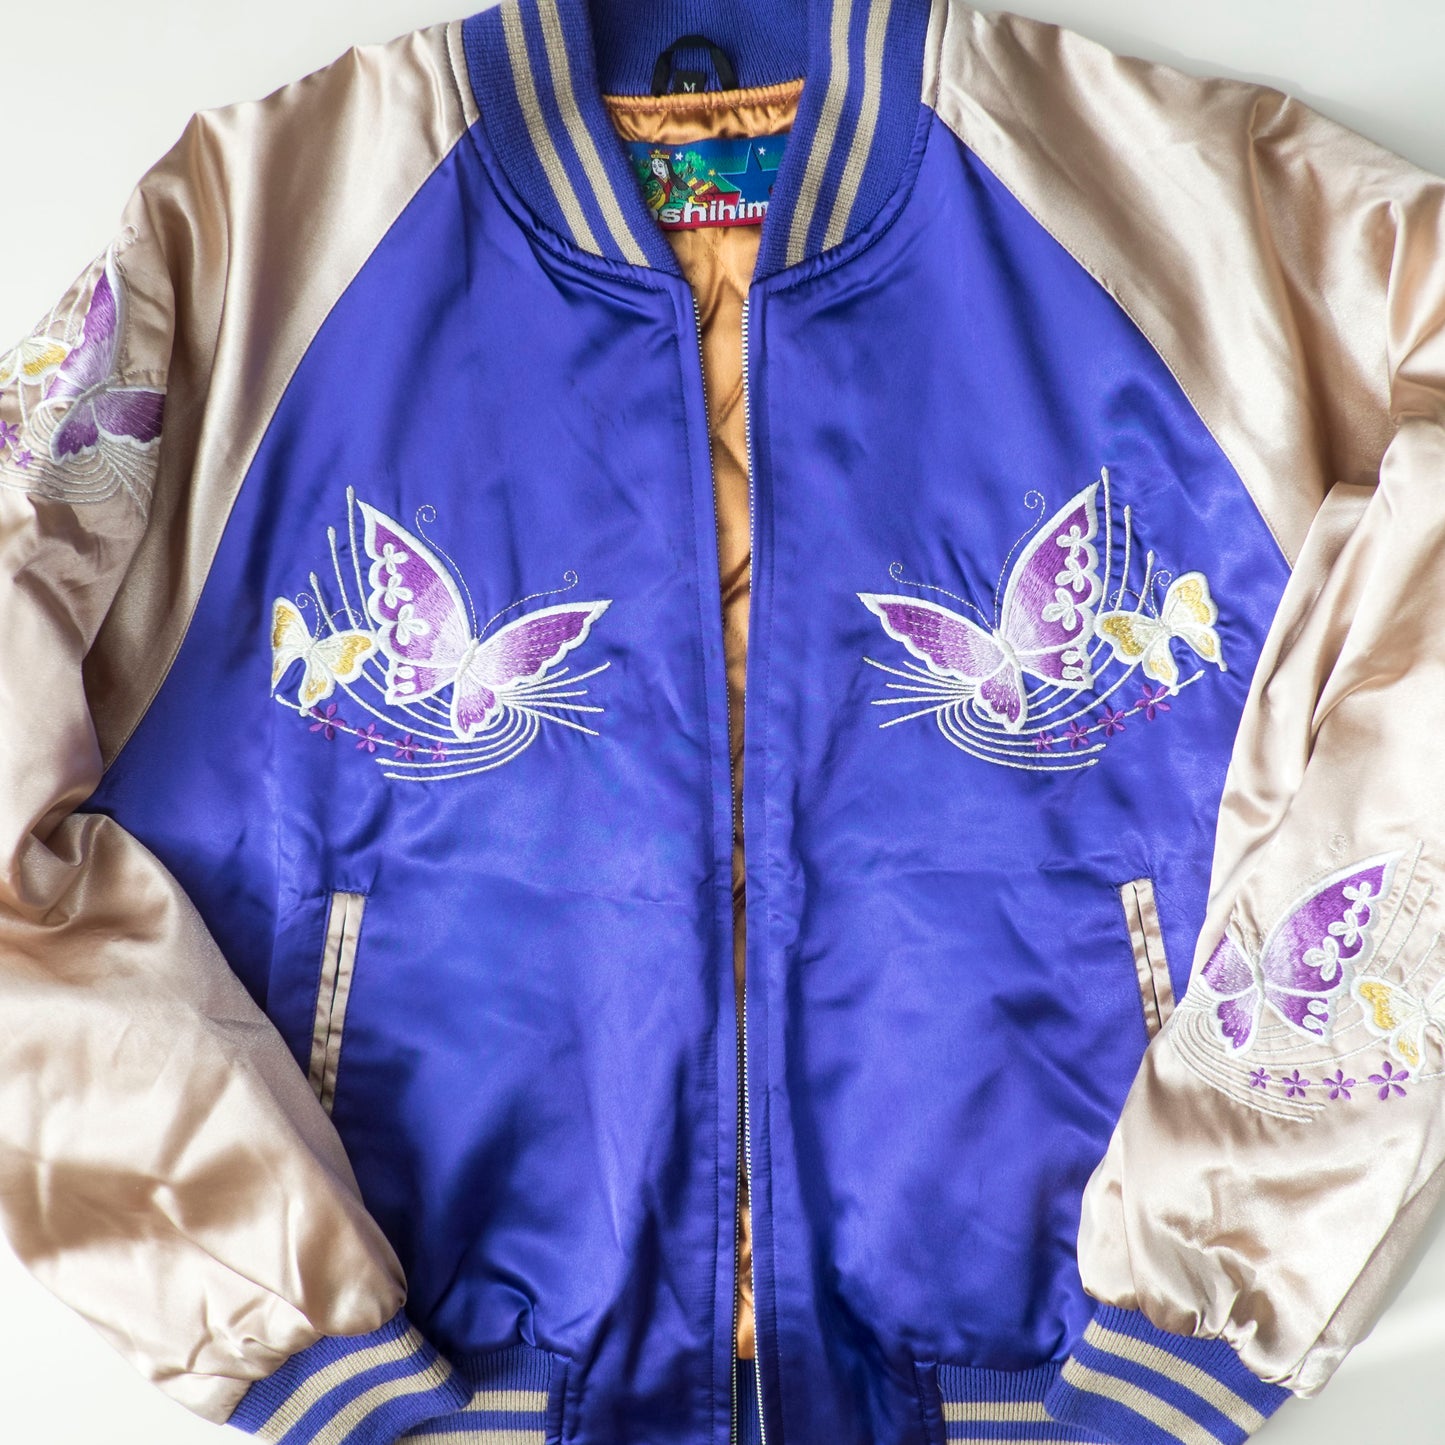 HOSHIHIME Japan Japanese Butterfly Chocho Blue Flowers Floral Flower Embroidery Embroidered Satin Souvenir Sukajan Bomber Jacket ( Size : M )